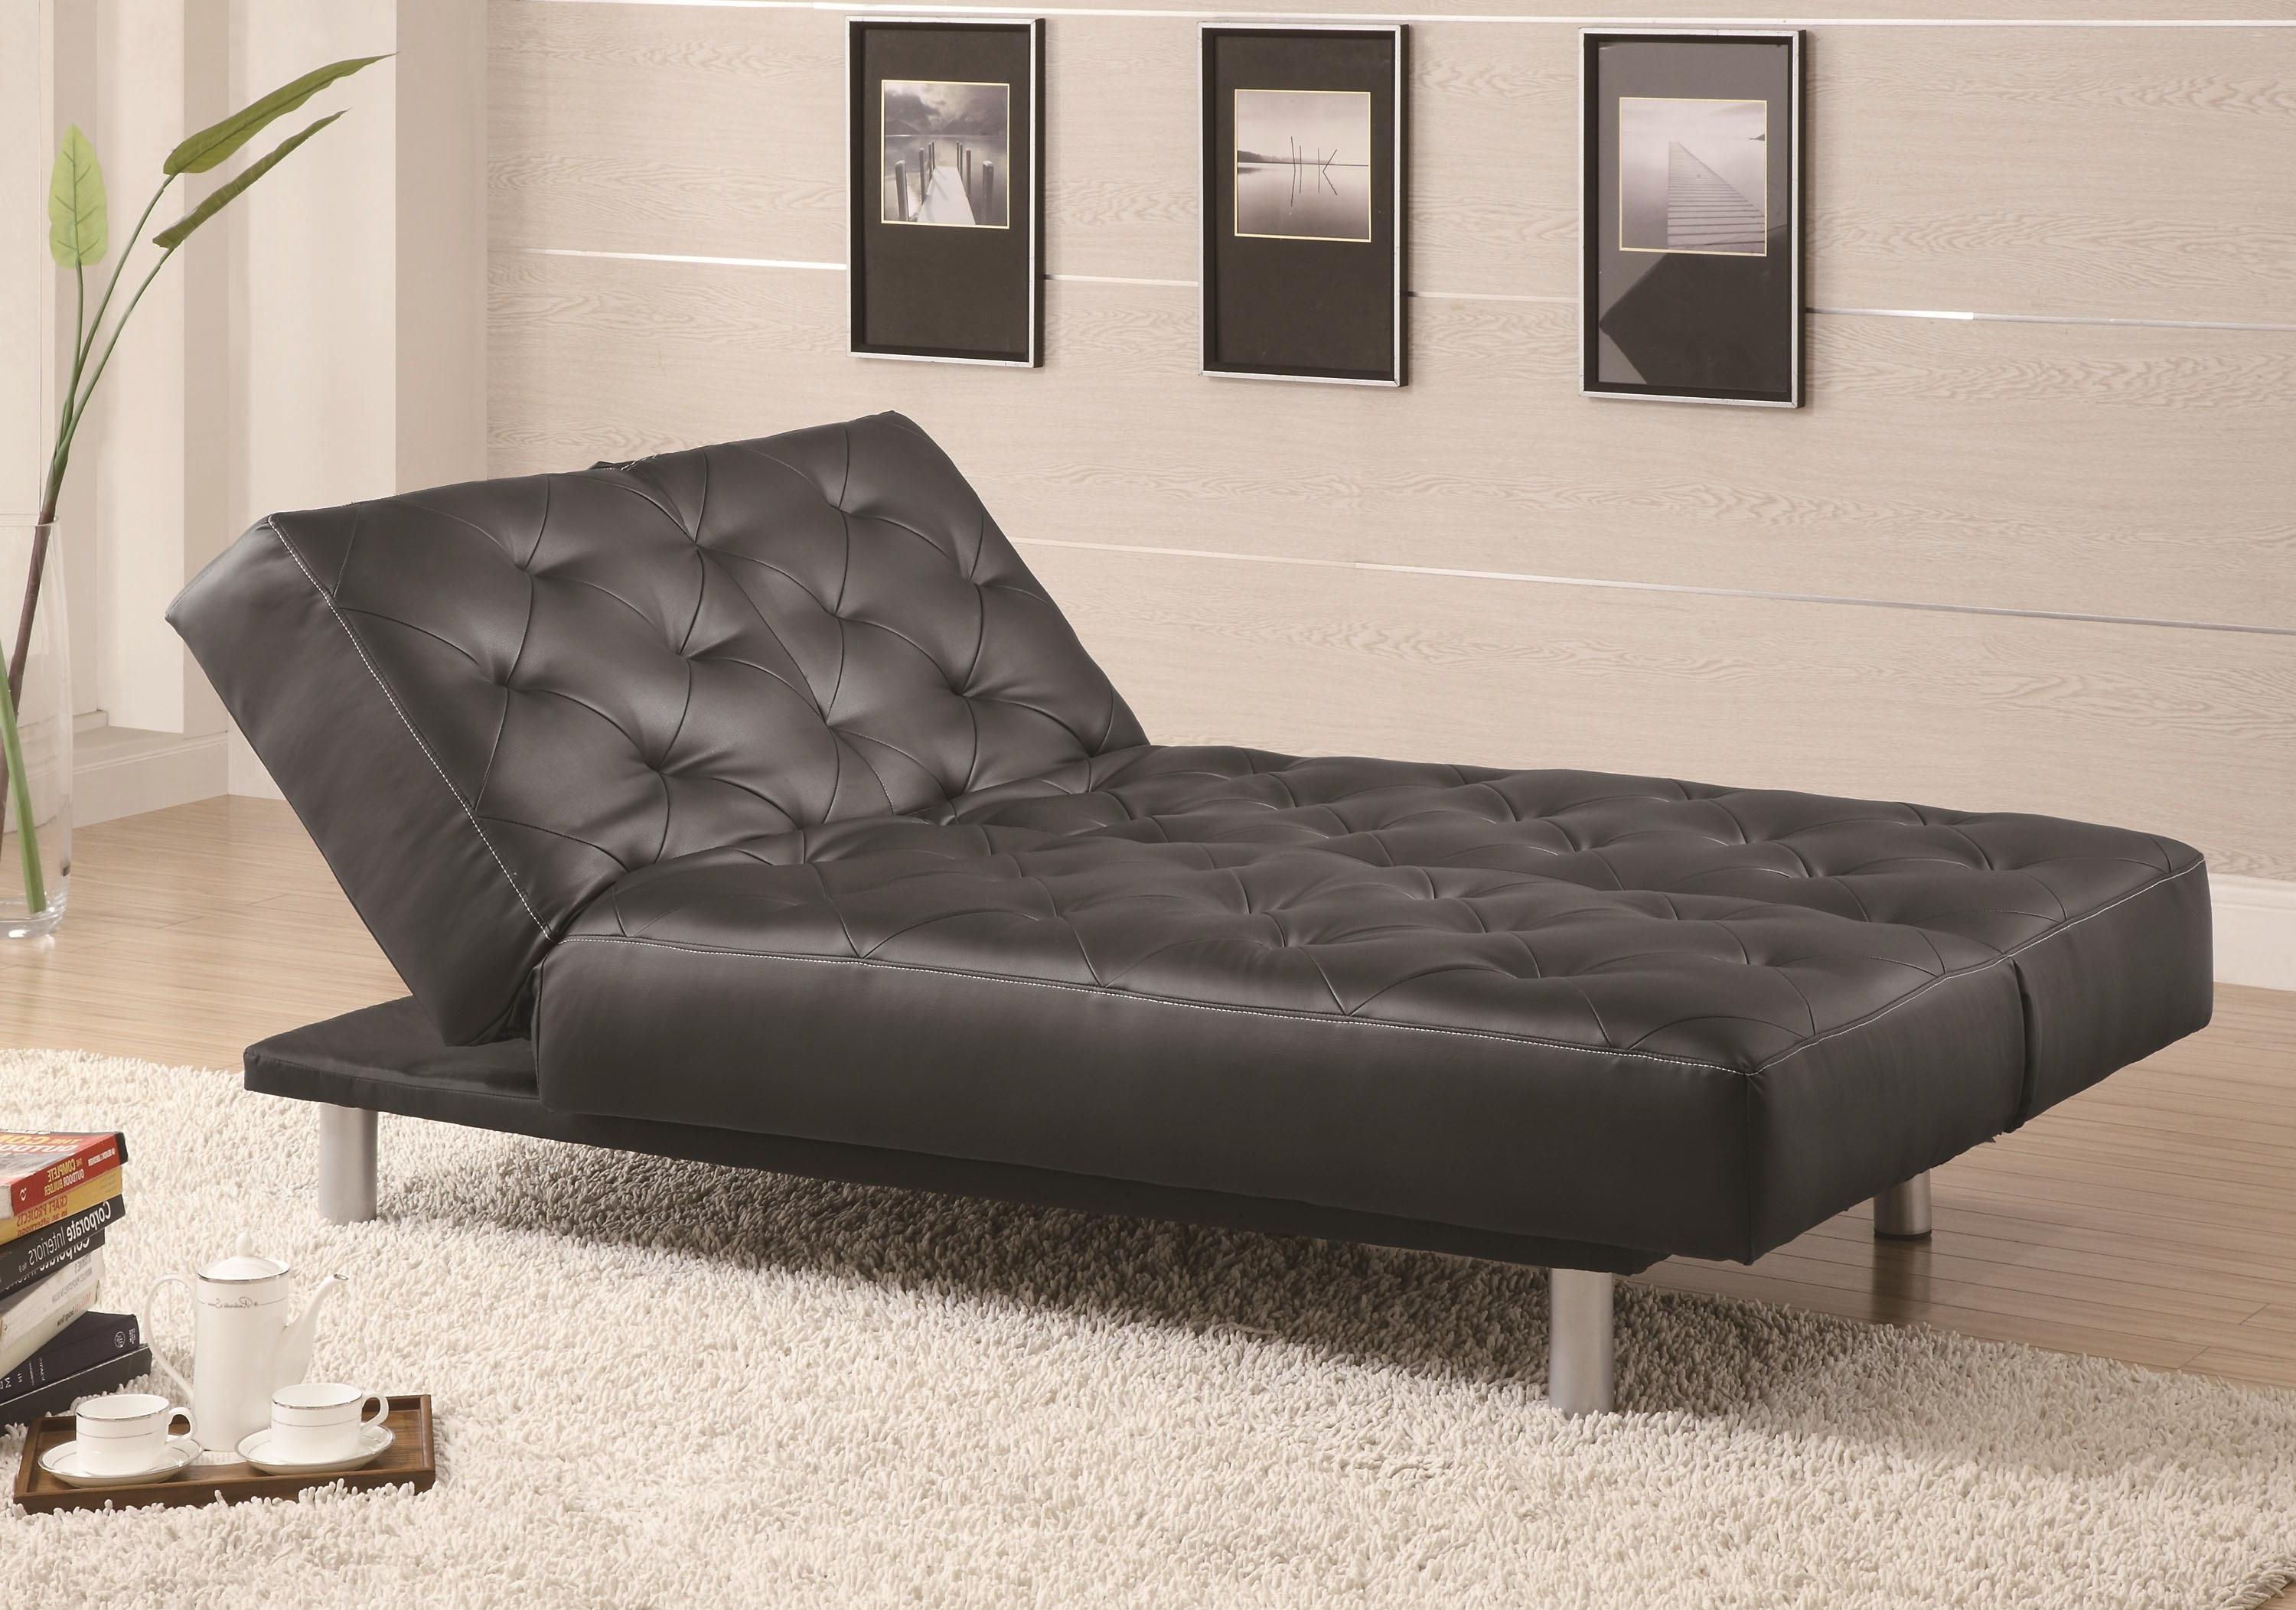 Coaster Sofa Beds And Futons Black Vinyl Tufted Sofa Bed/oversize Throughout Latest Sofa Chaise Convertible Beds (View 6 of 15)